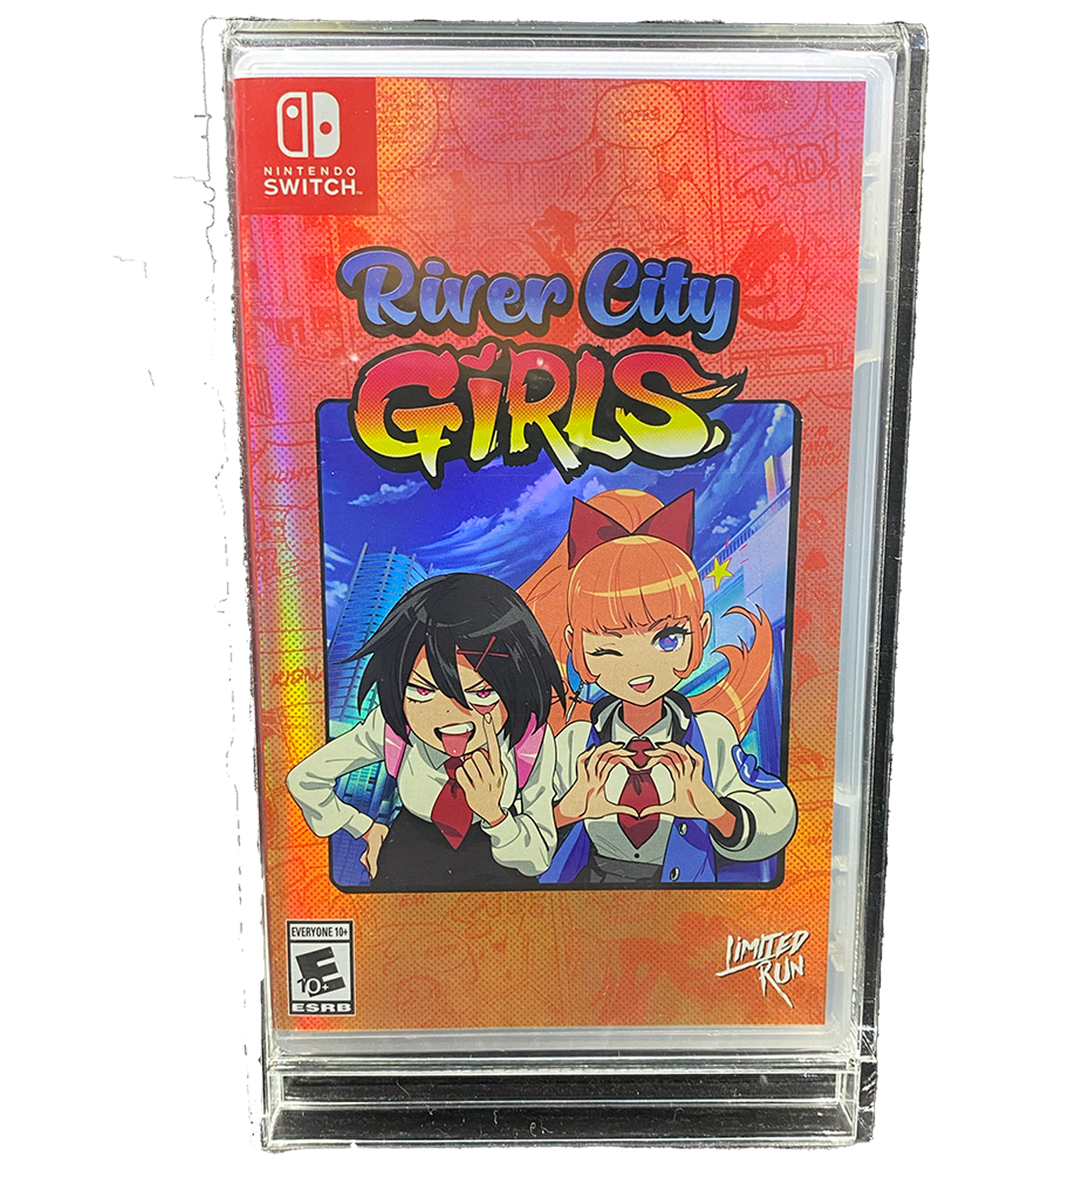 Limited Run Switch Game Display Stand – Limited Run Games